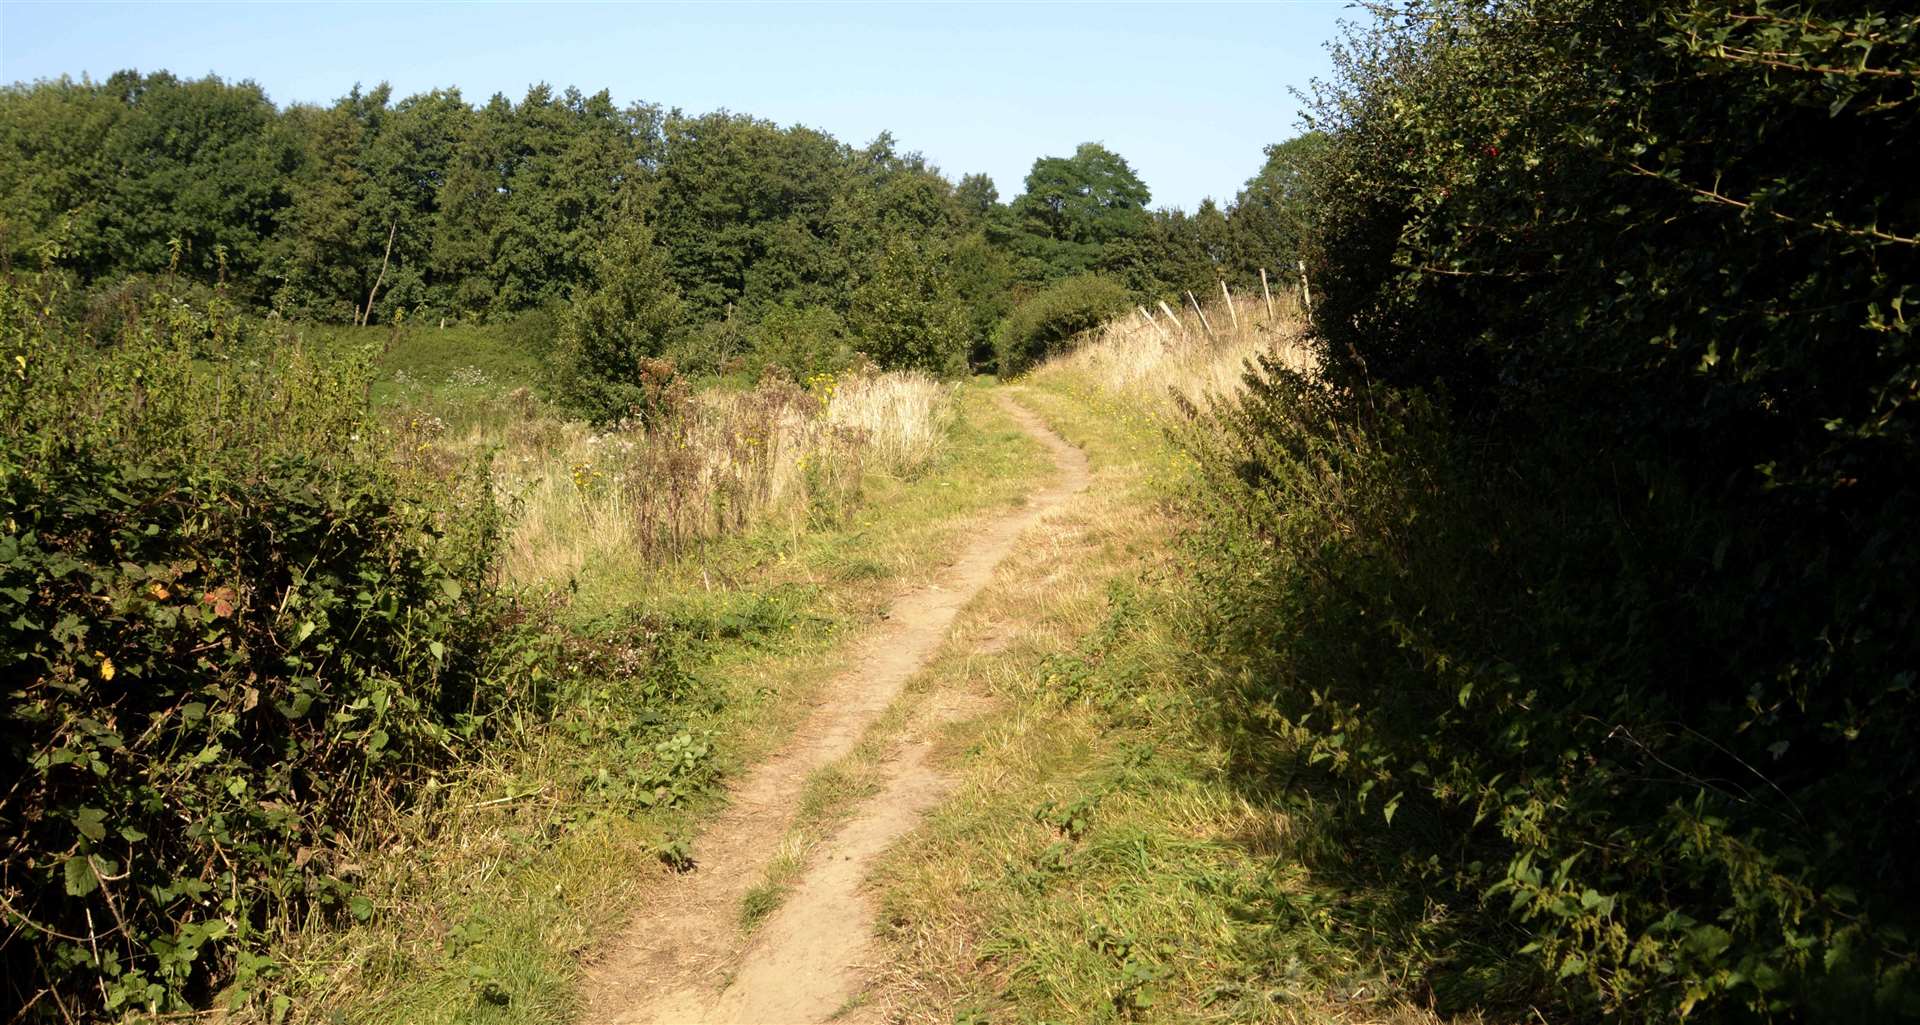 Five public rights of way cross the site